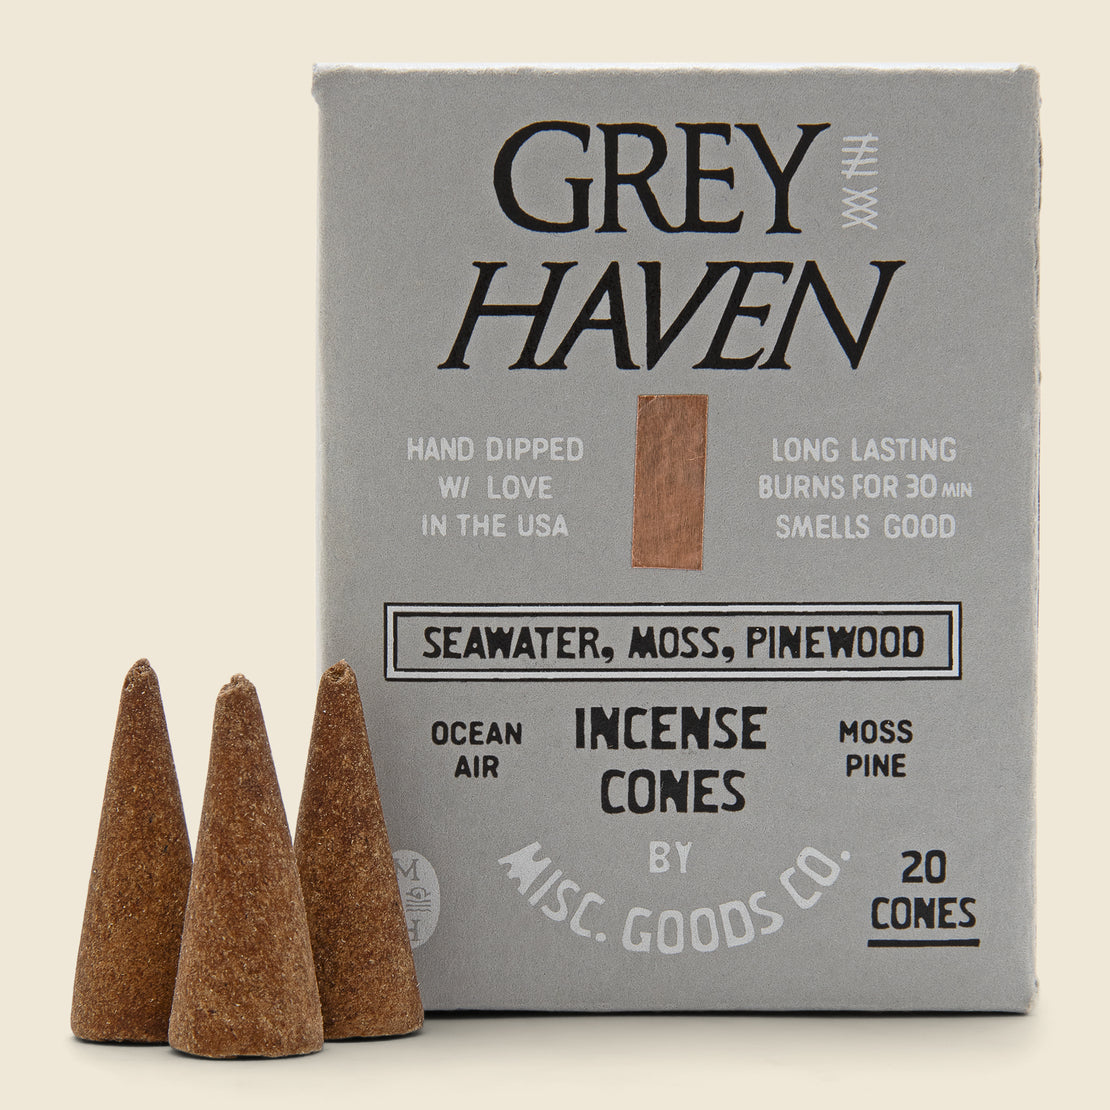 Misc Goods Co. Cone Incense - Greyhaven